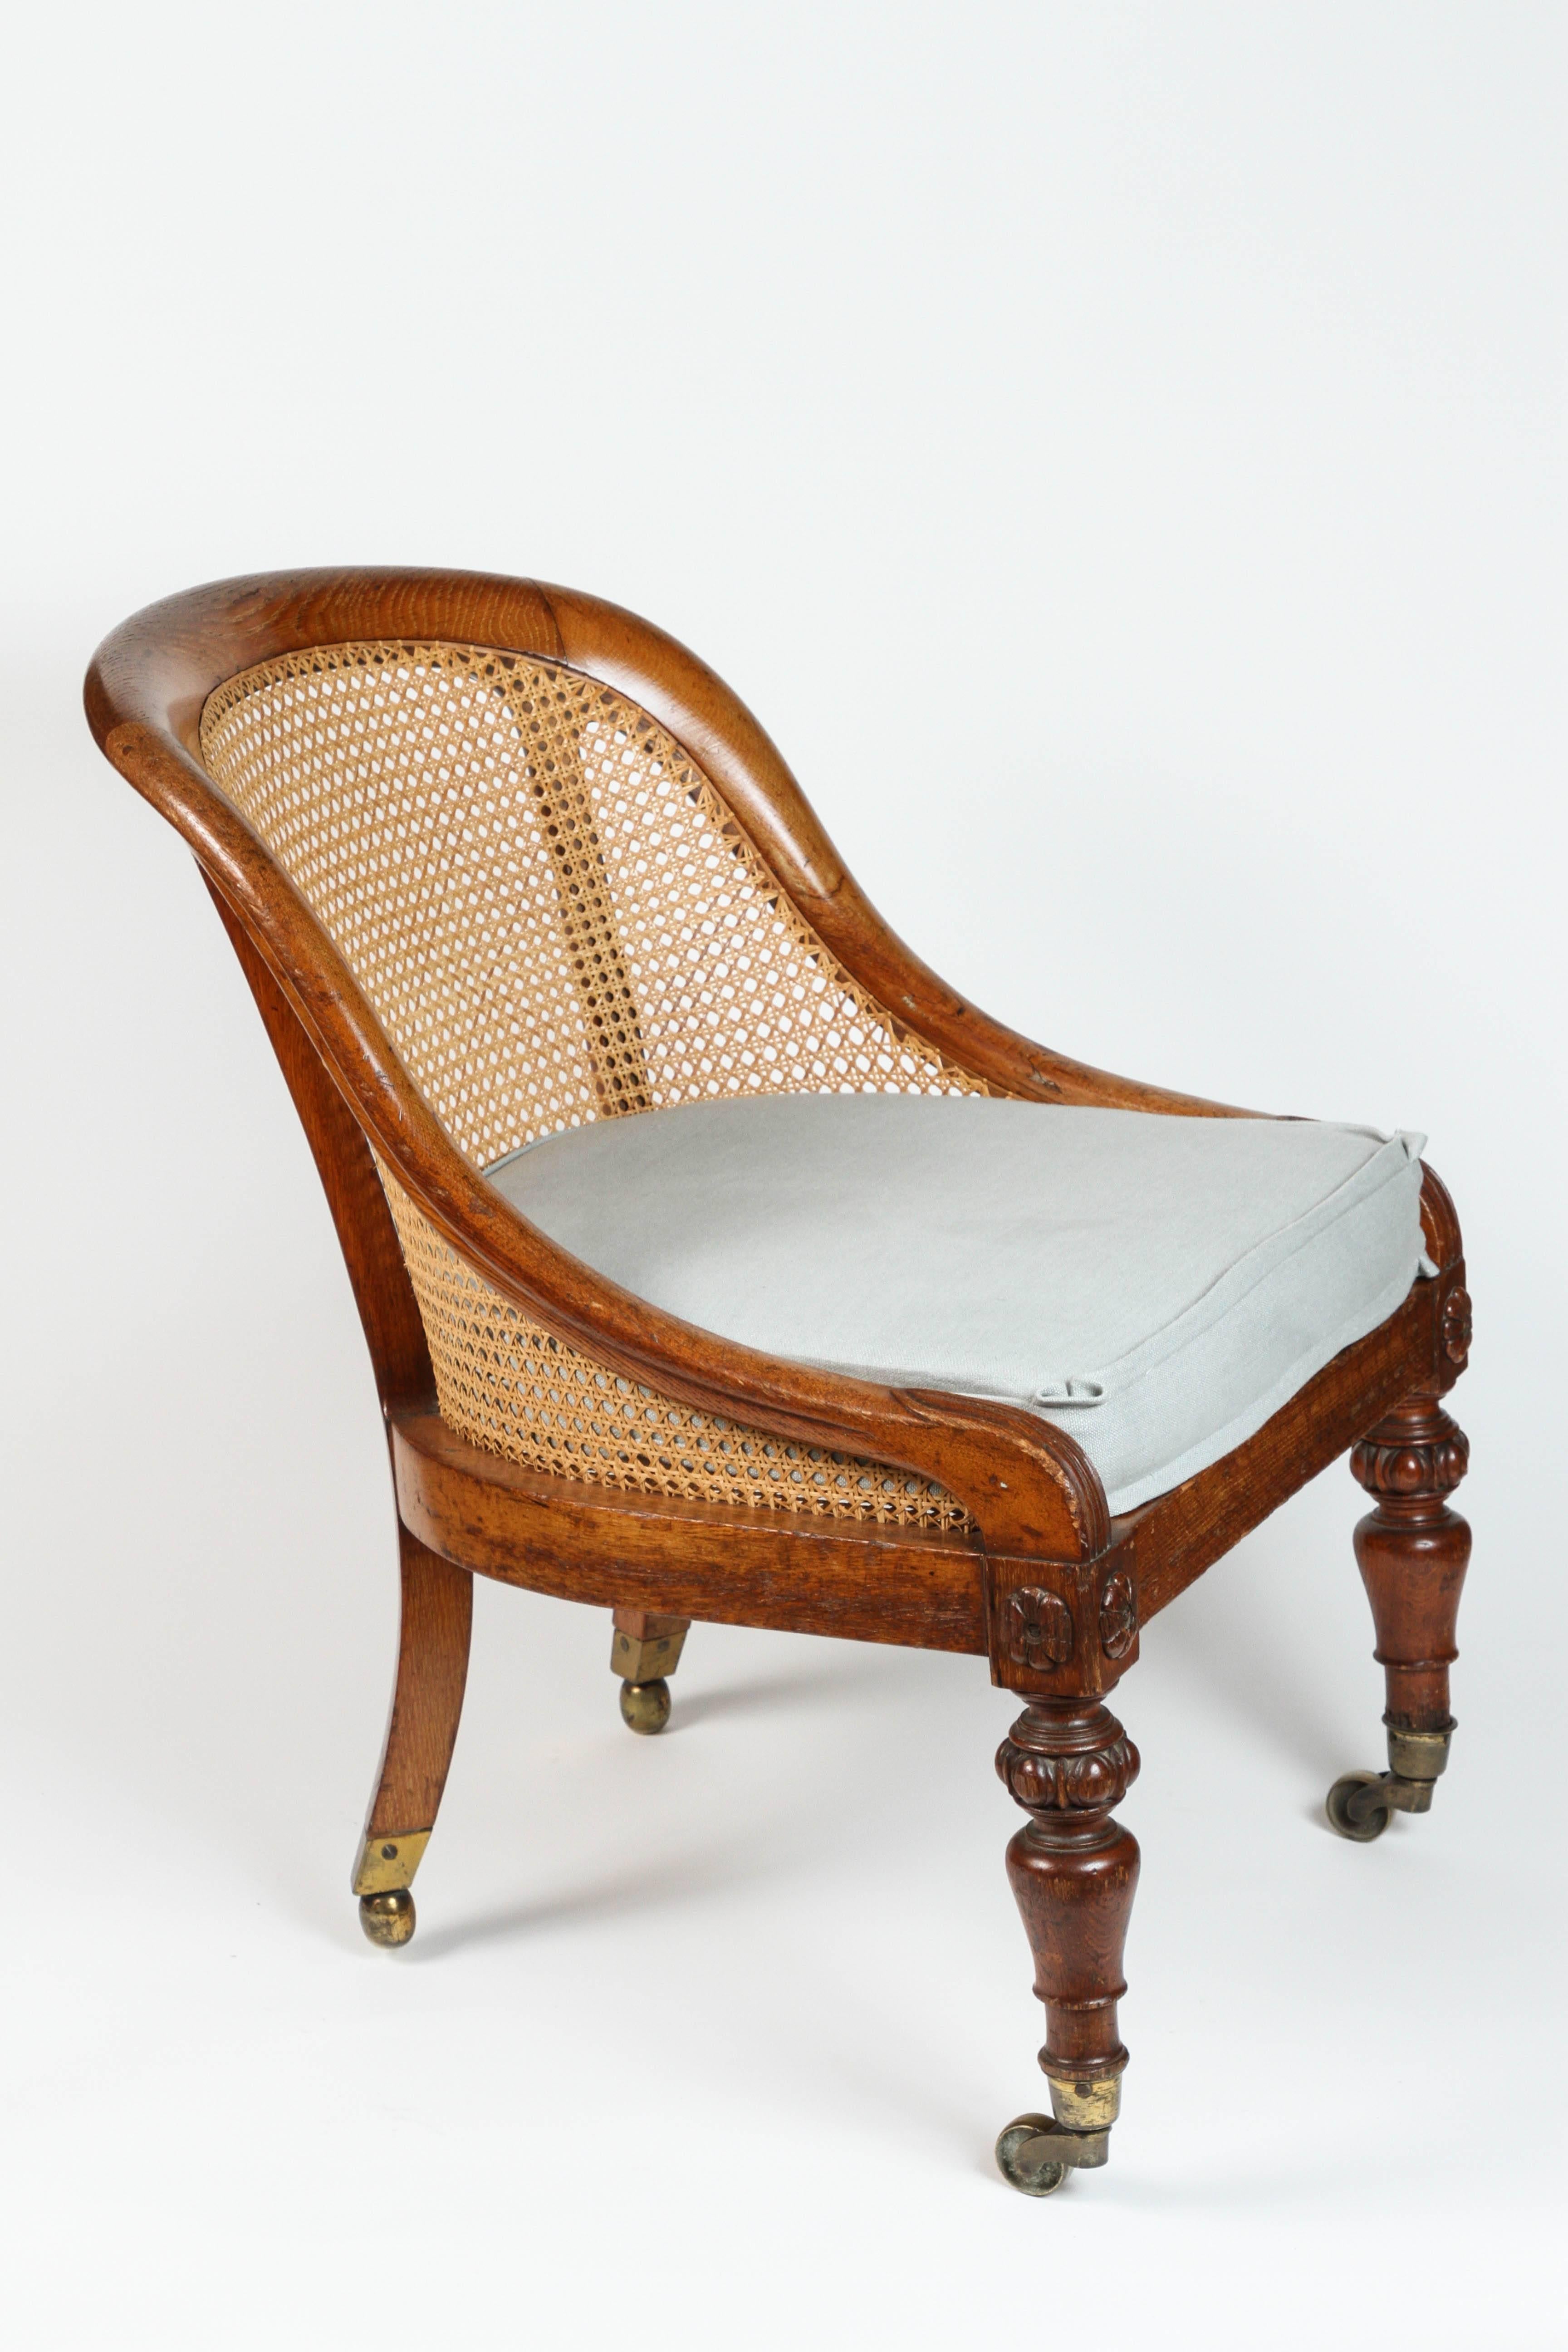 Elm 19th Century Pair of English Caned Spoon-Back Chairs For Sale